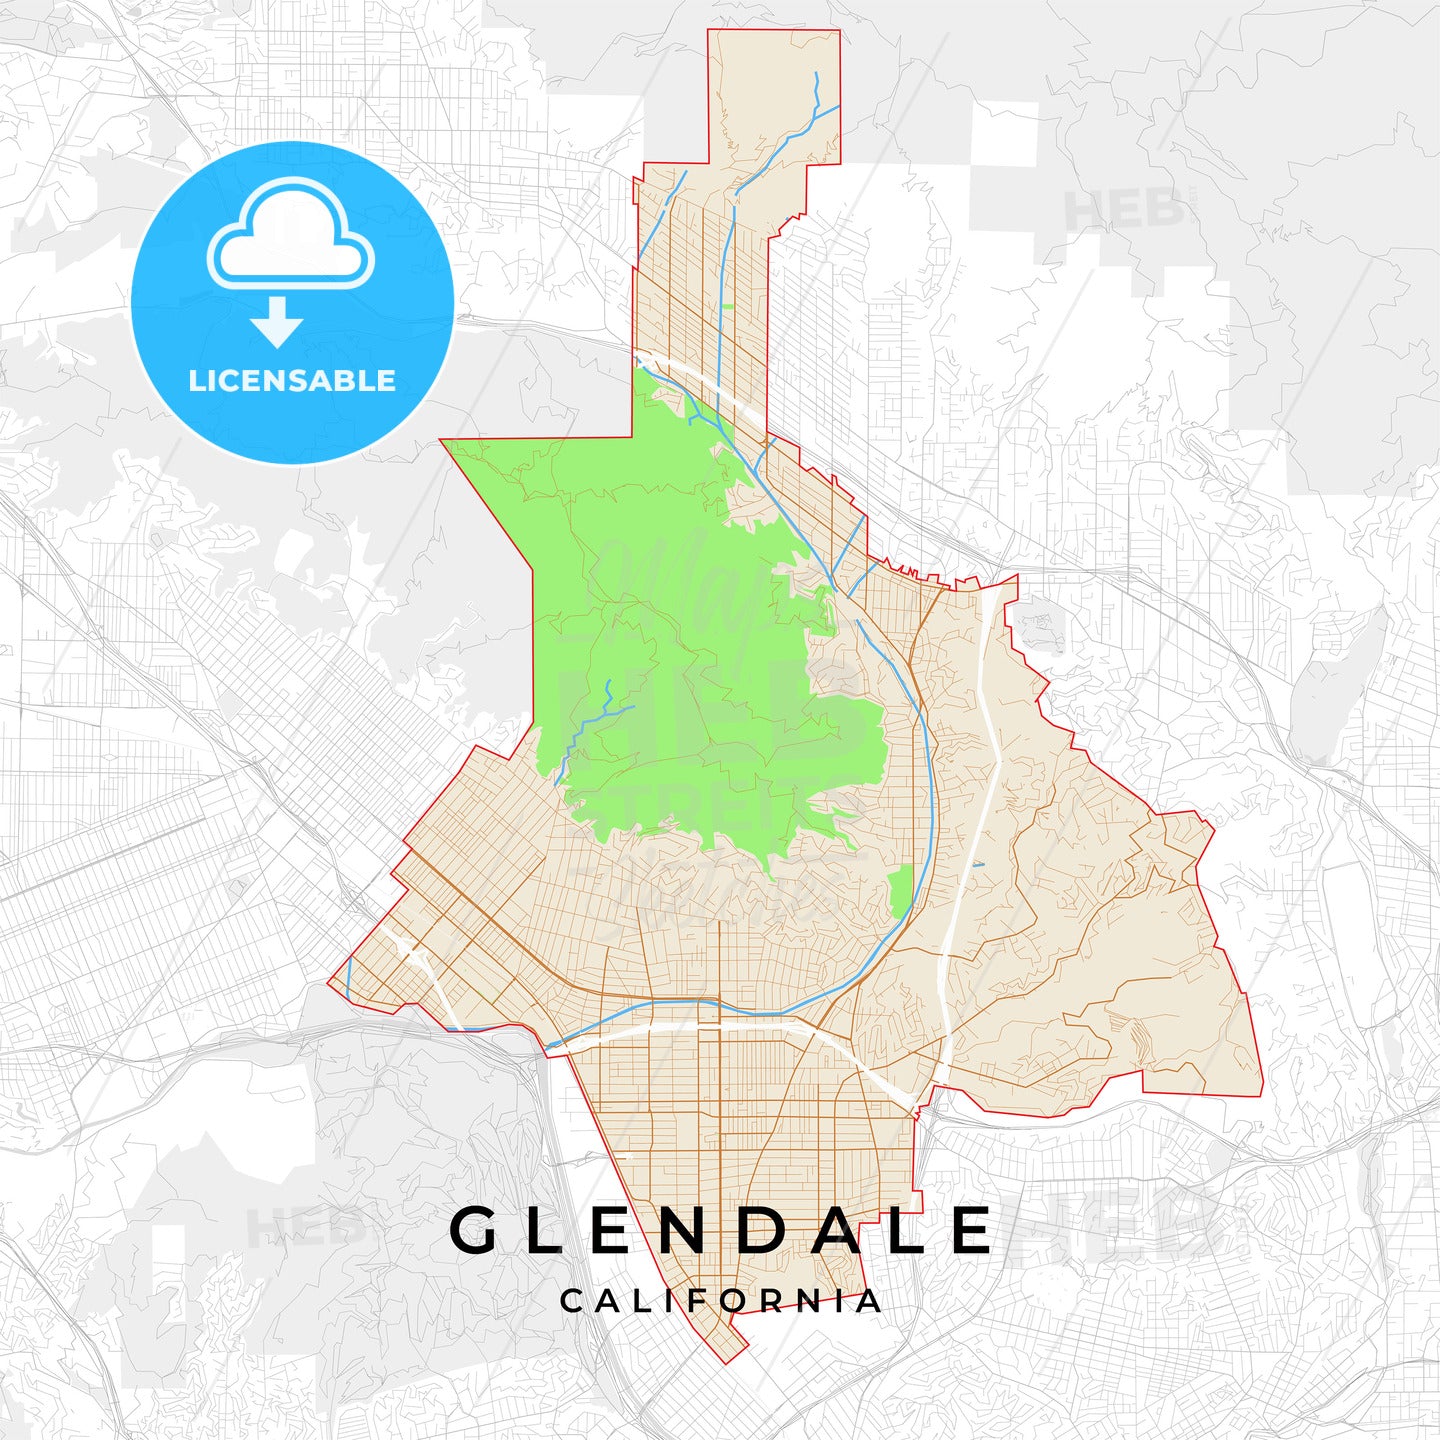 Vector map of Glendale, California, USA - HEBSTREITS